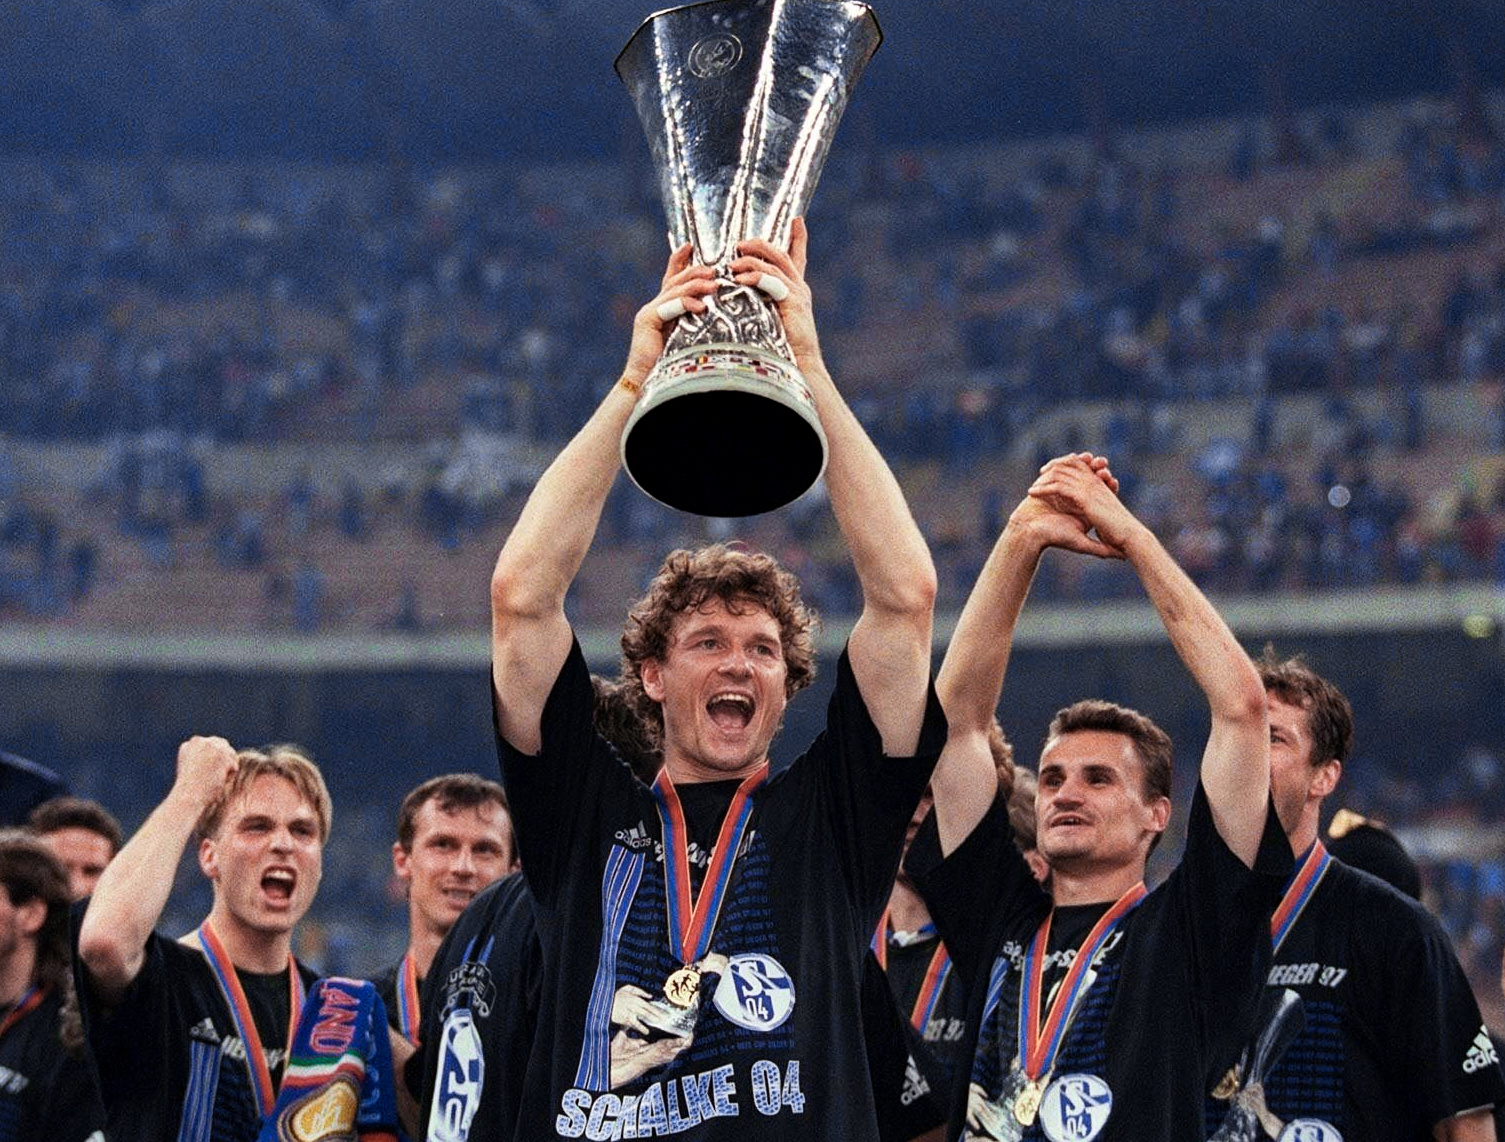 Schalke and the famed Eurofighters of 1997 who lifted the UEFA CupSchalke and the famed Eurofighters of 1997 who lifted the UEFA Cup